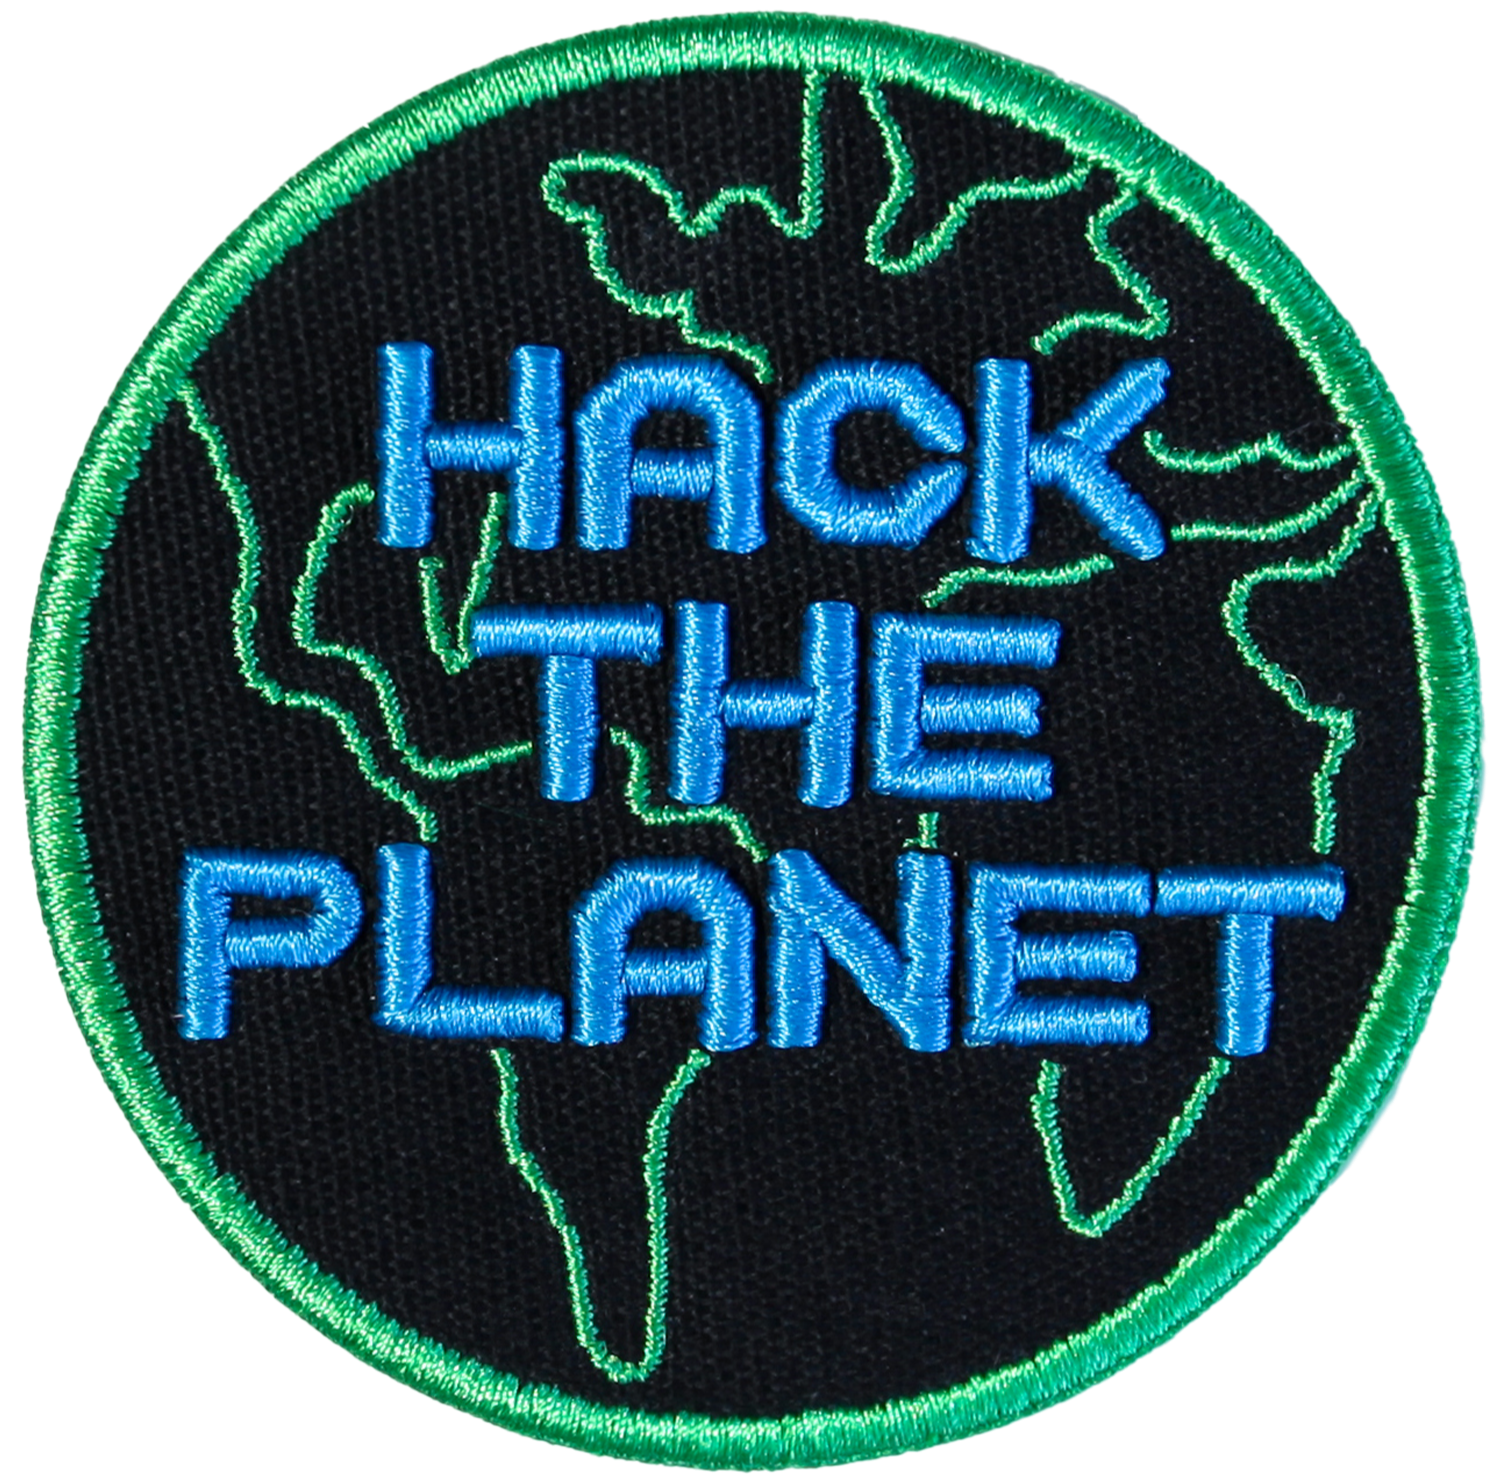 HACK THE PLANET